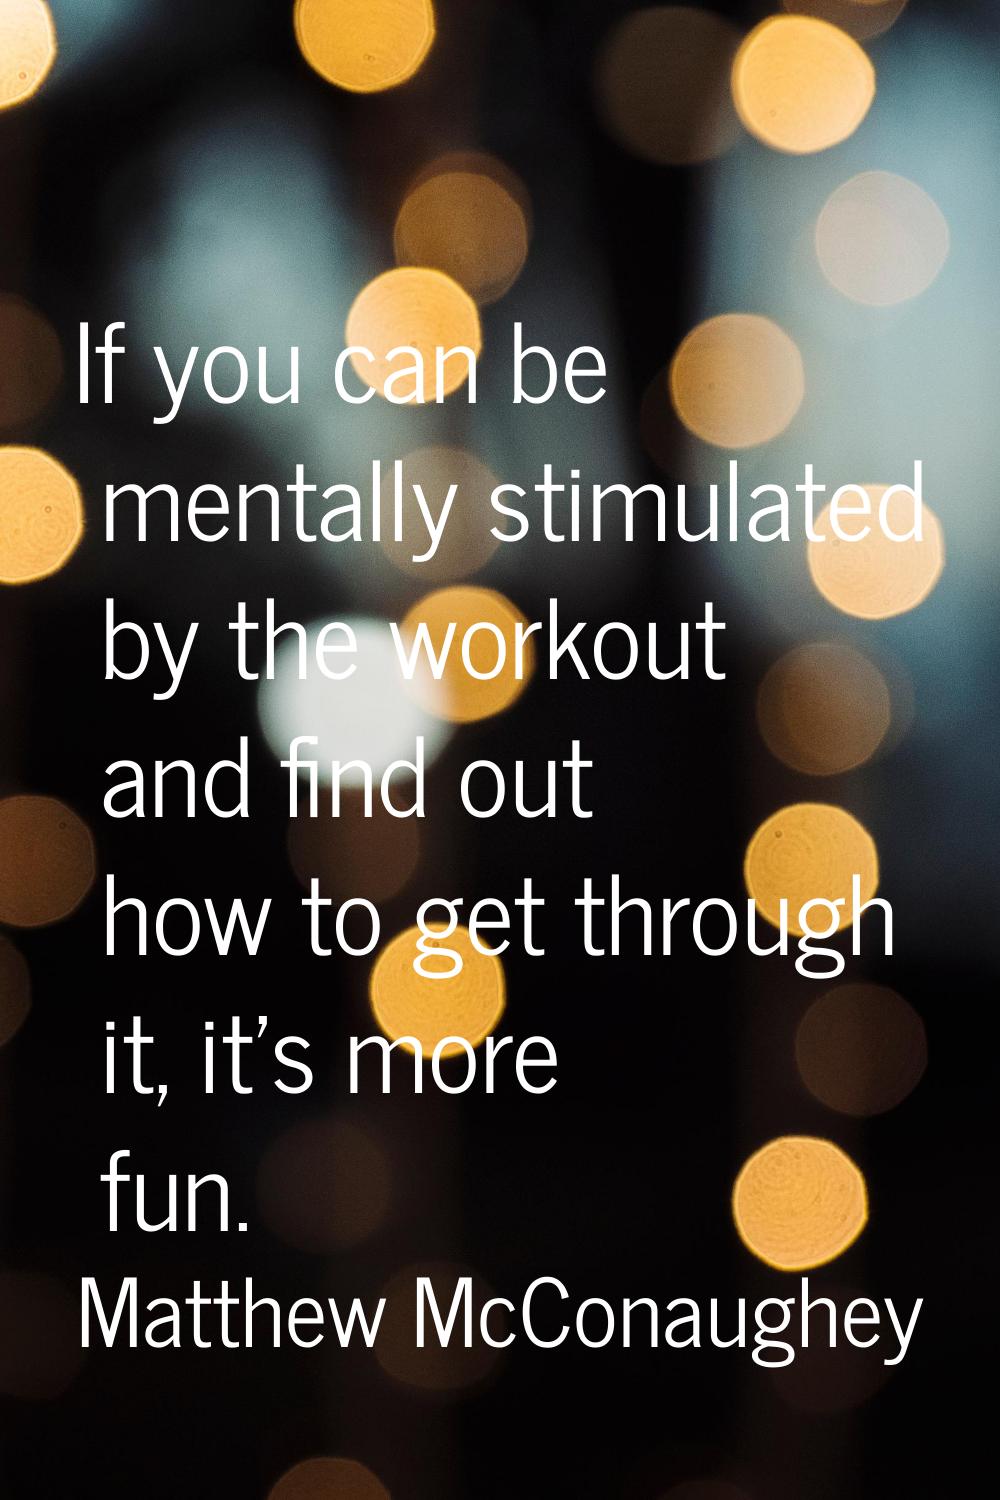 If you can be mentally stimulated by the workout and find out how to get through it, it's more fun.